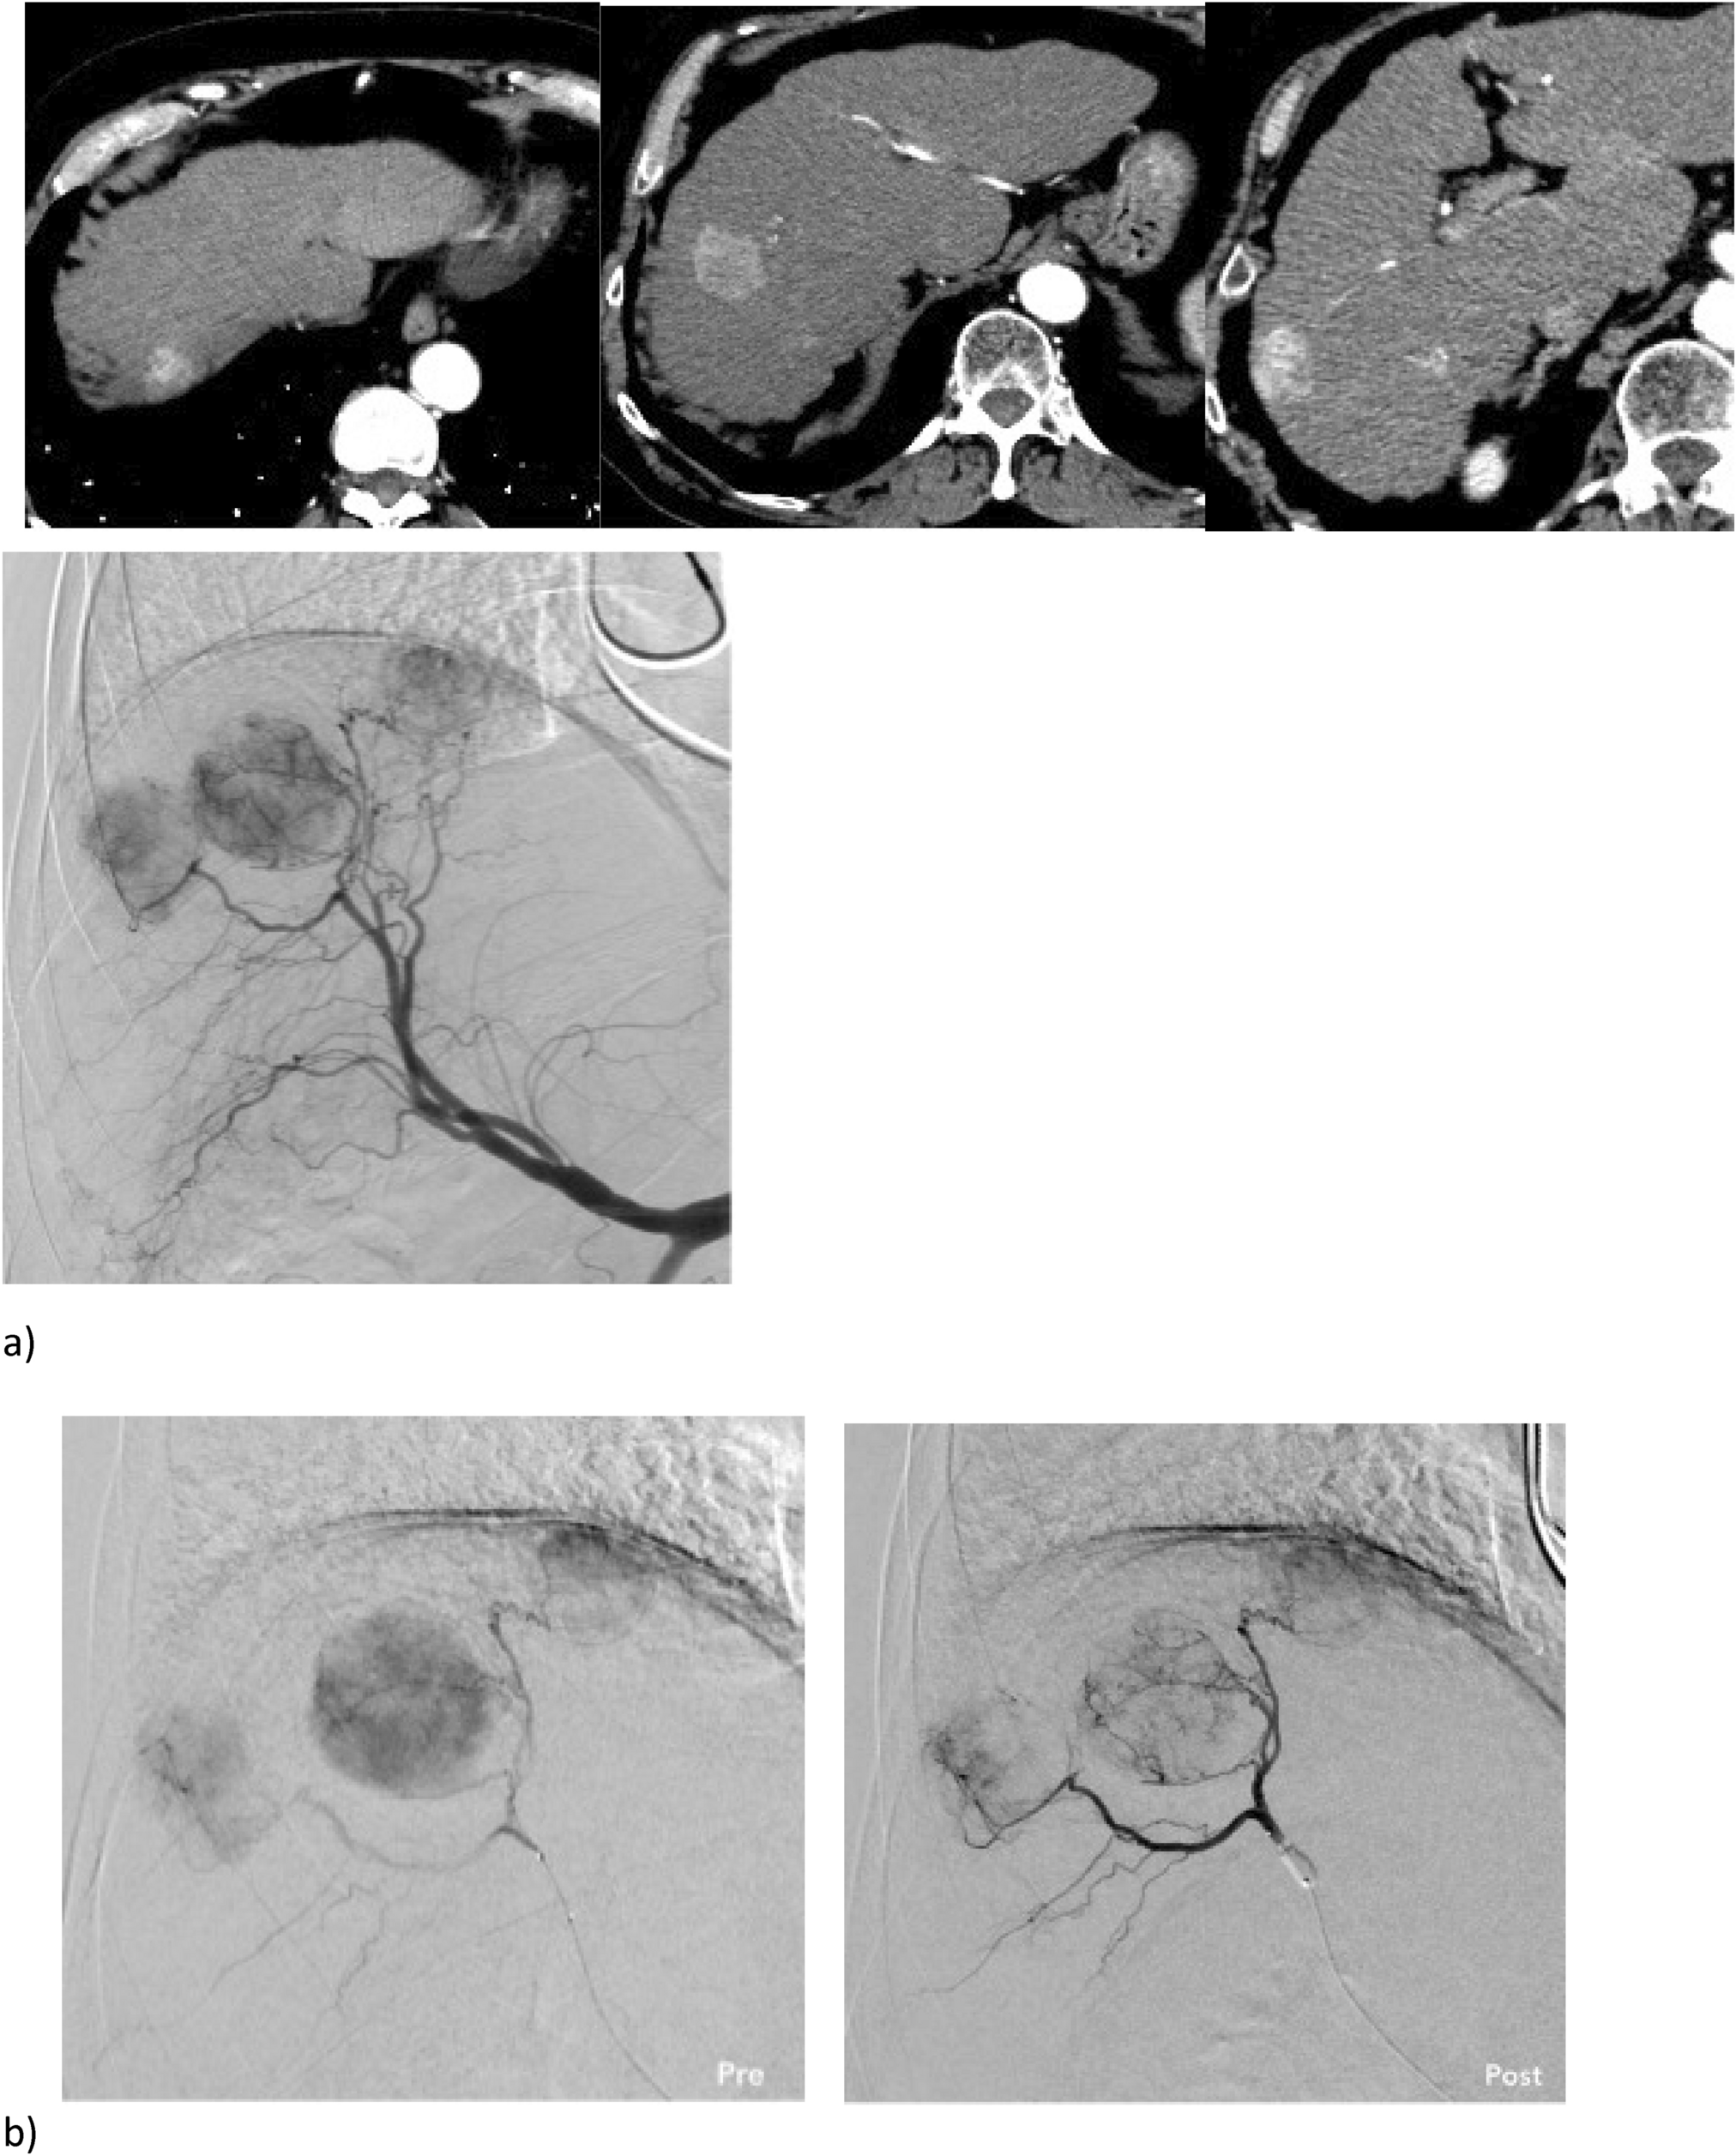 Two-dimensional perfusion angiography permits direct visualization of redistribution of flow in hepatocellular carcinoma during b-TACE